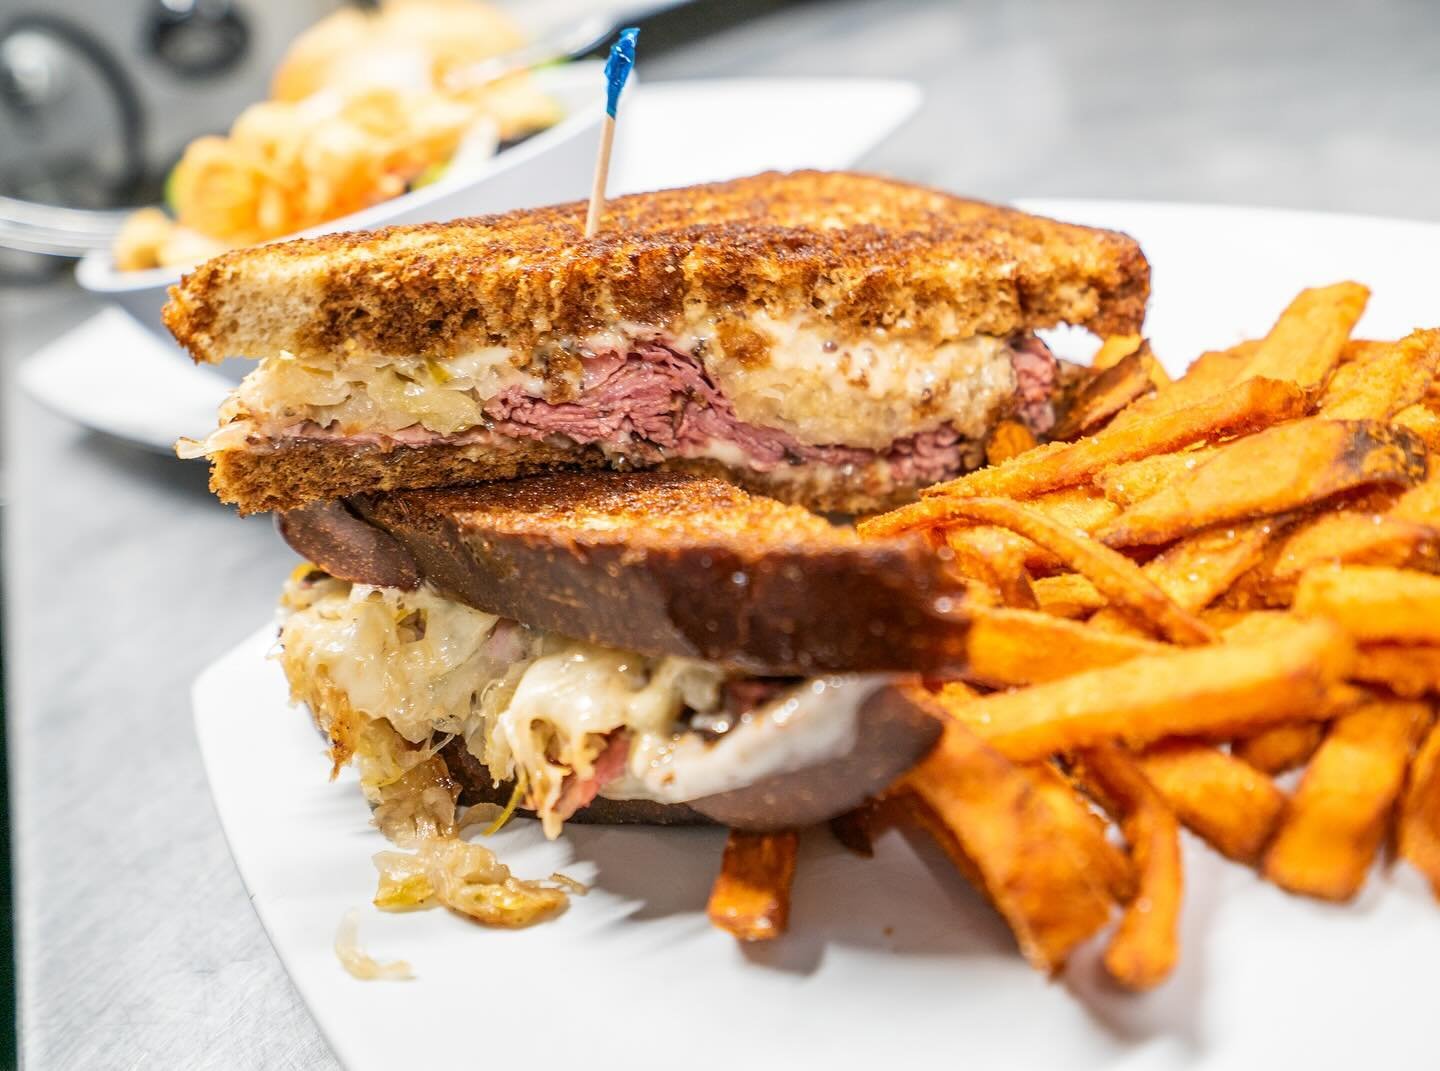 Come try our Rueben Sandwich! Sliced pastrami, sauerkraut and Swiss on marble rye with stone ground mustard aioli 🍻